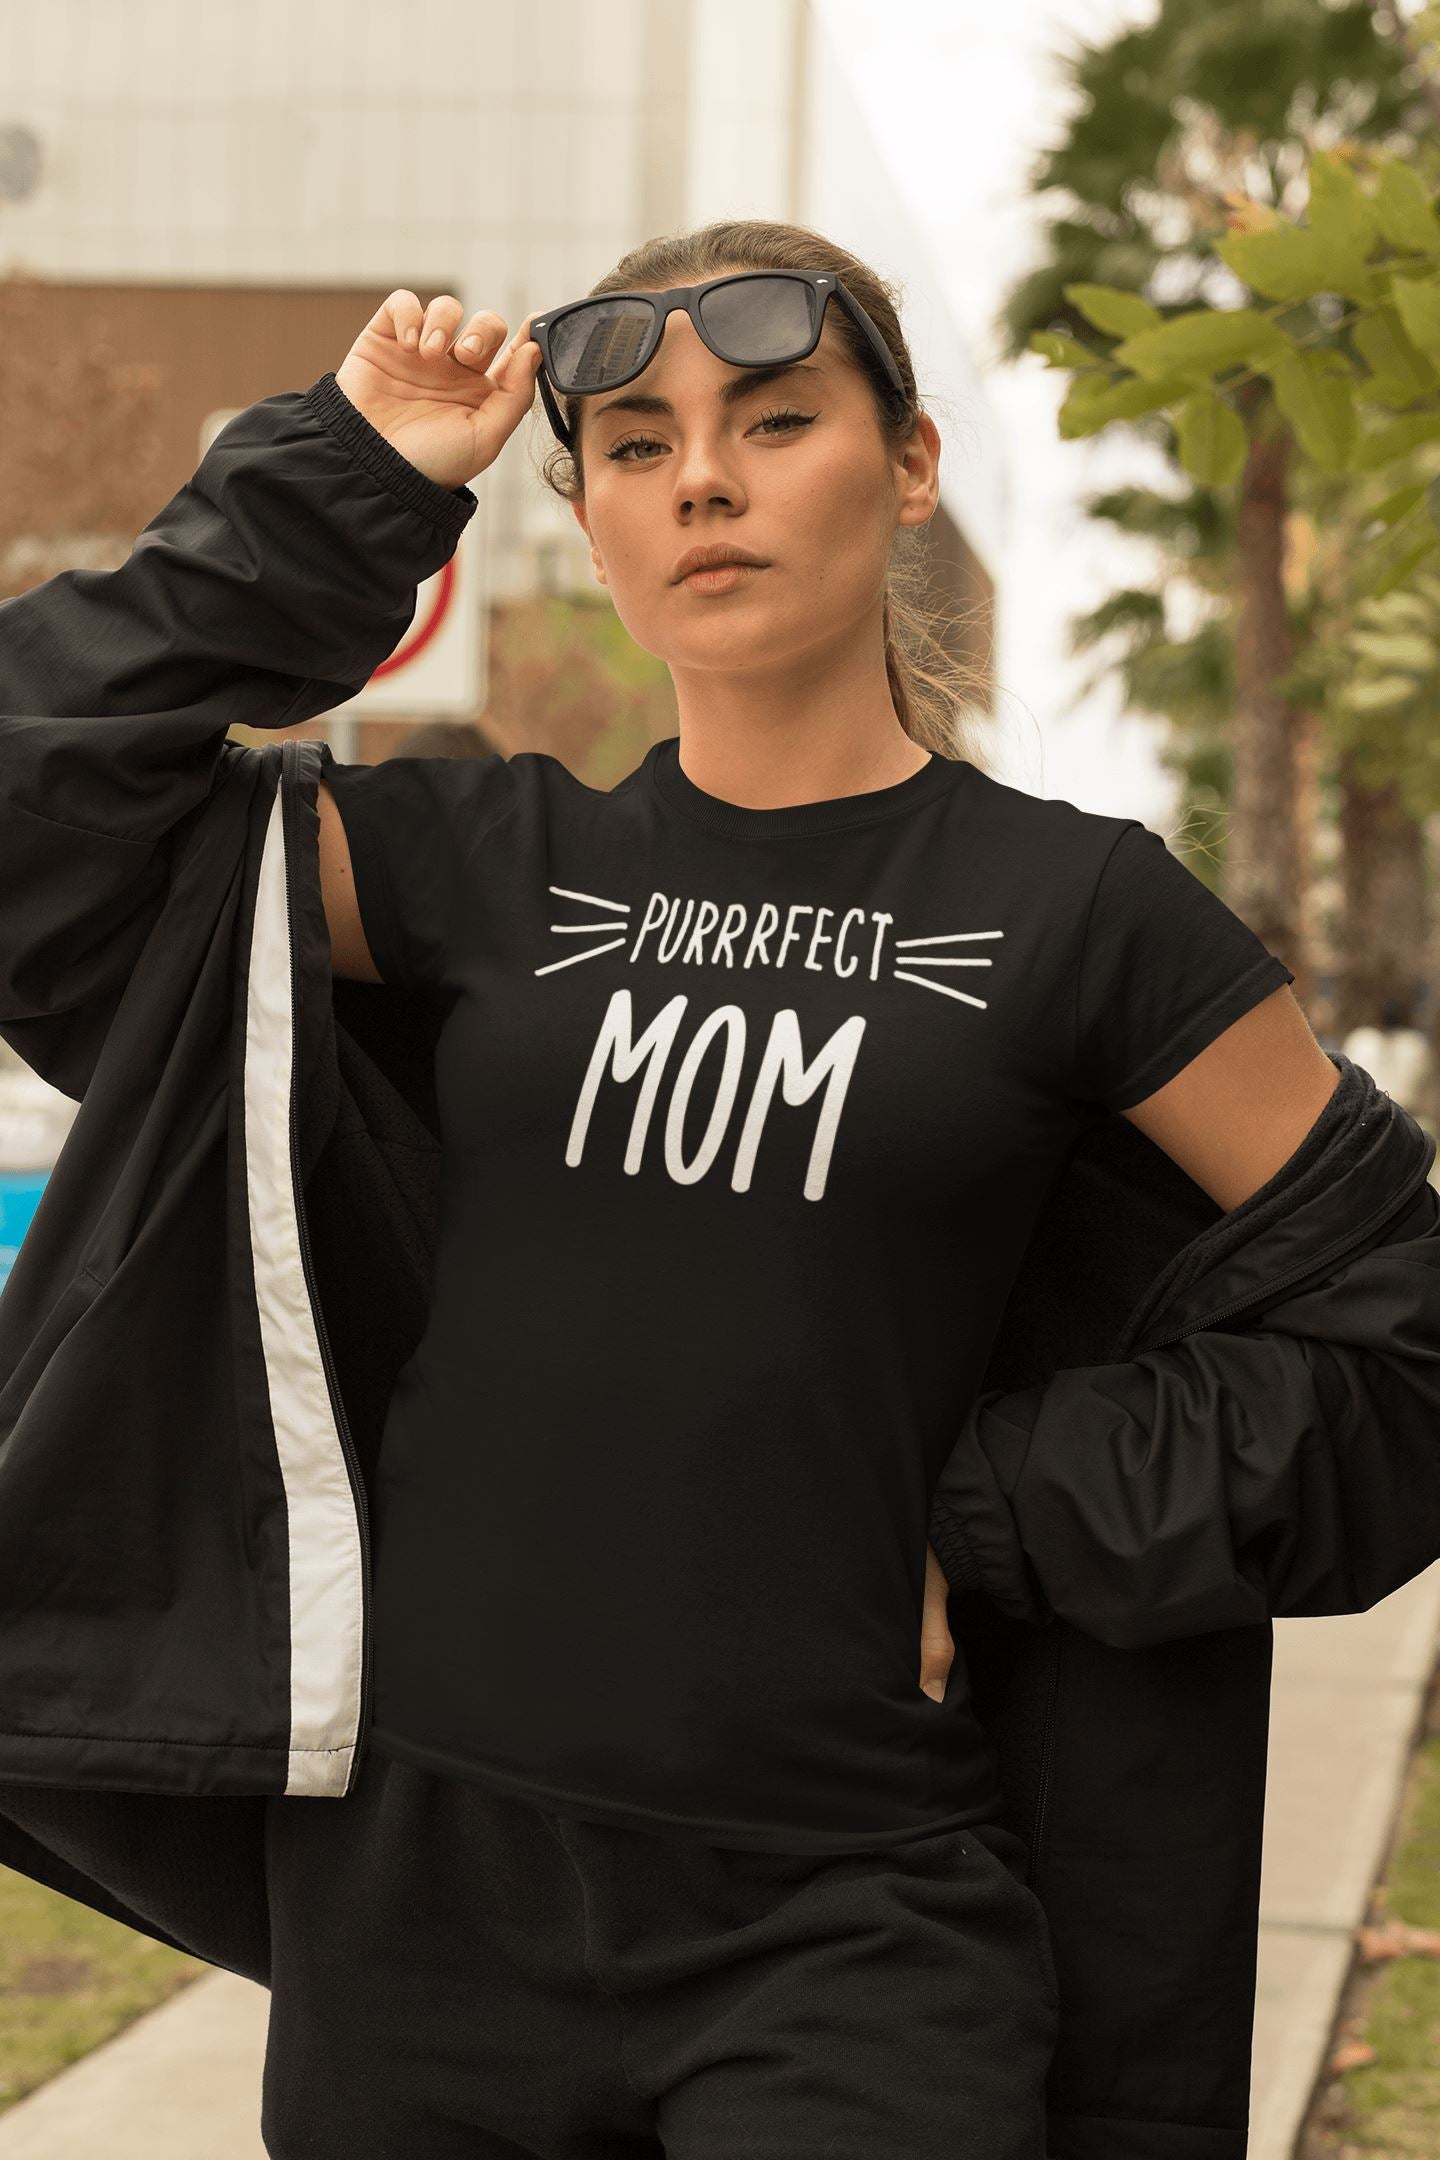 Purrfect Mom Special Black T Shirt for Women Cat Moms - Catch My Drift India  black, cat, cats, clothing, female, made in india, shirt, t shirt, trending, tshirt